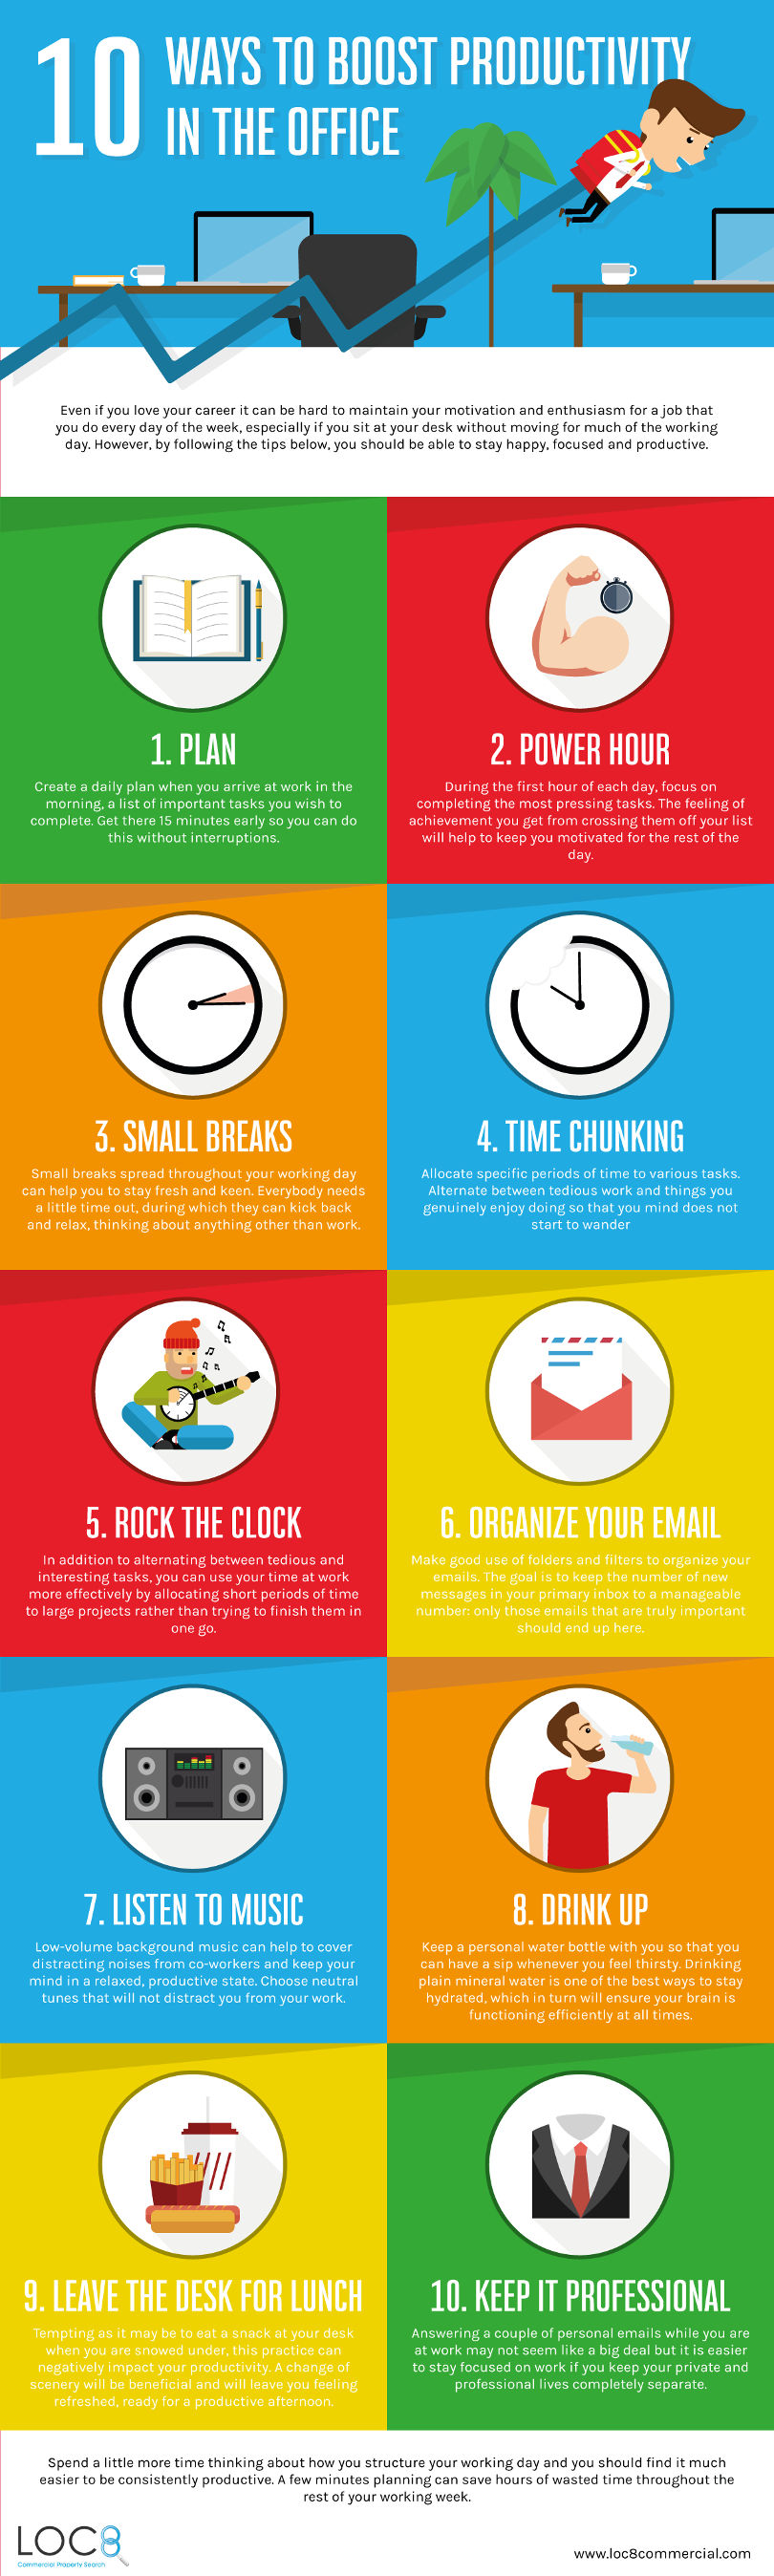 Boost productivity in the office - infographic